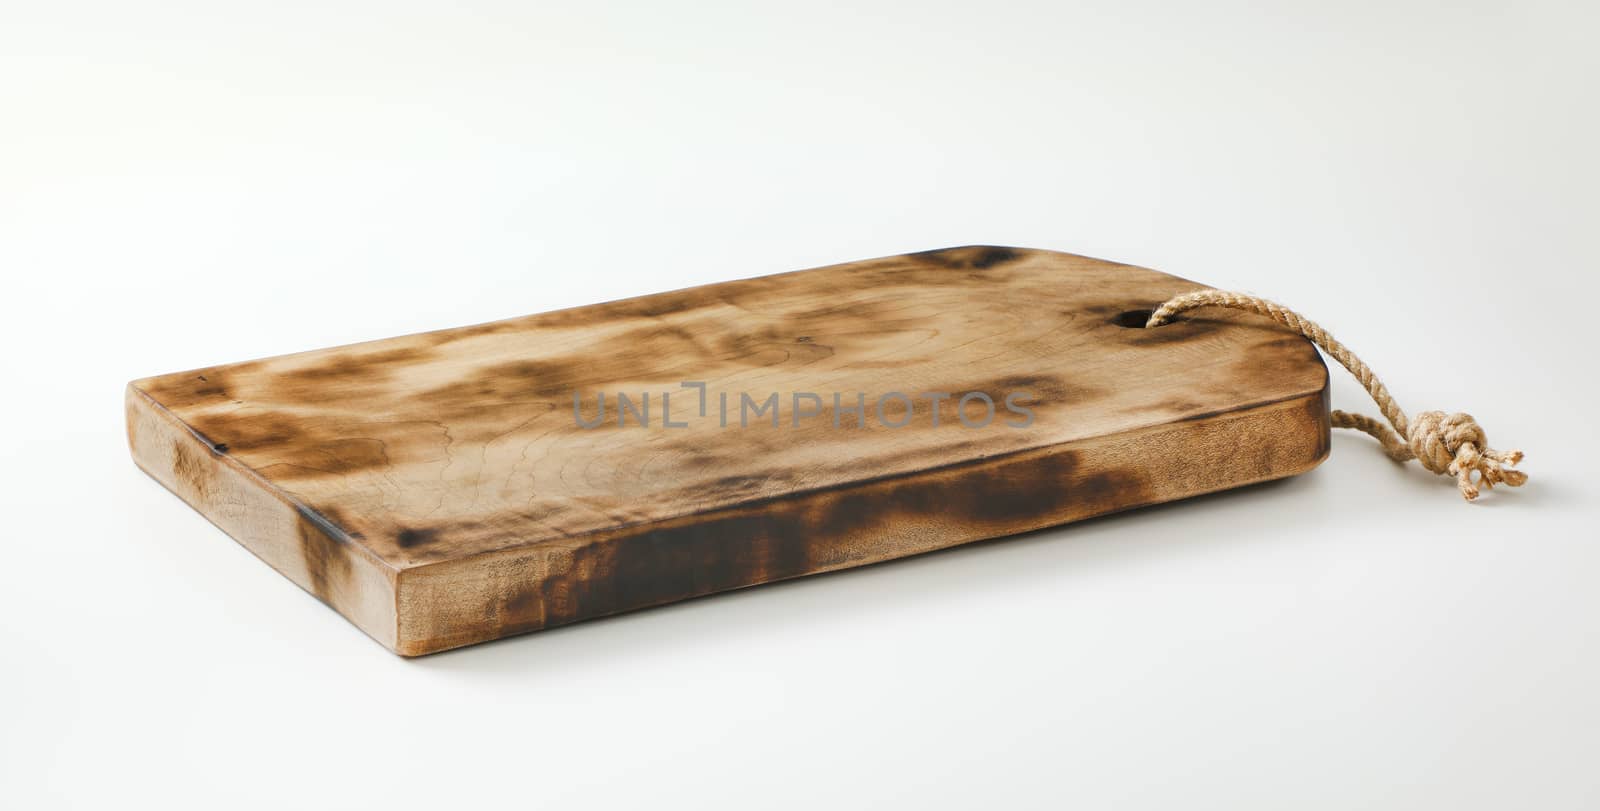 Rustic rectangle wooden cutting board or serving tray